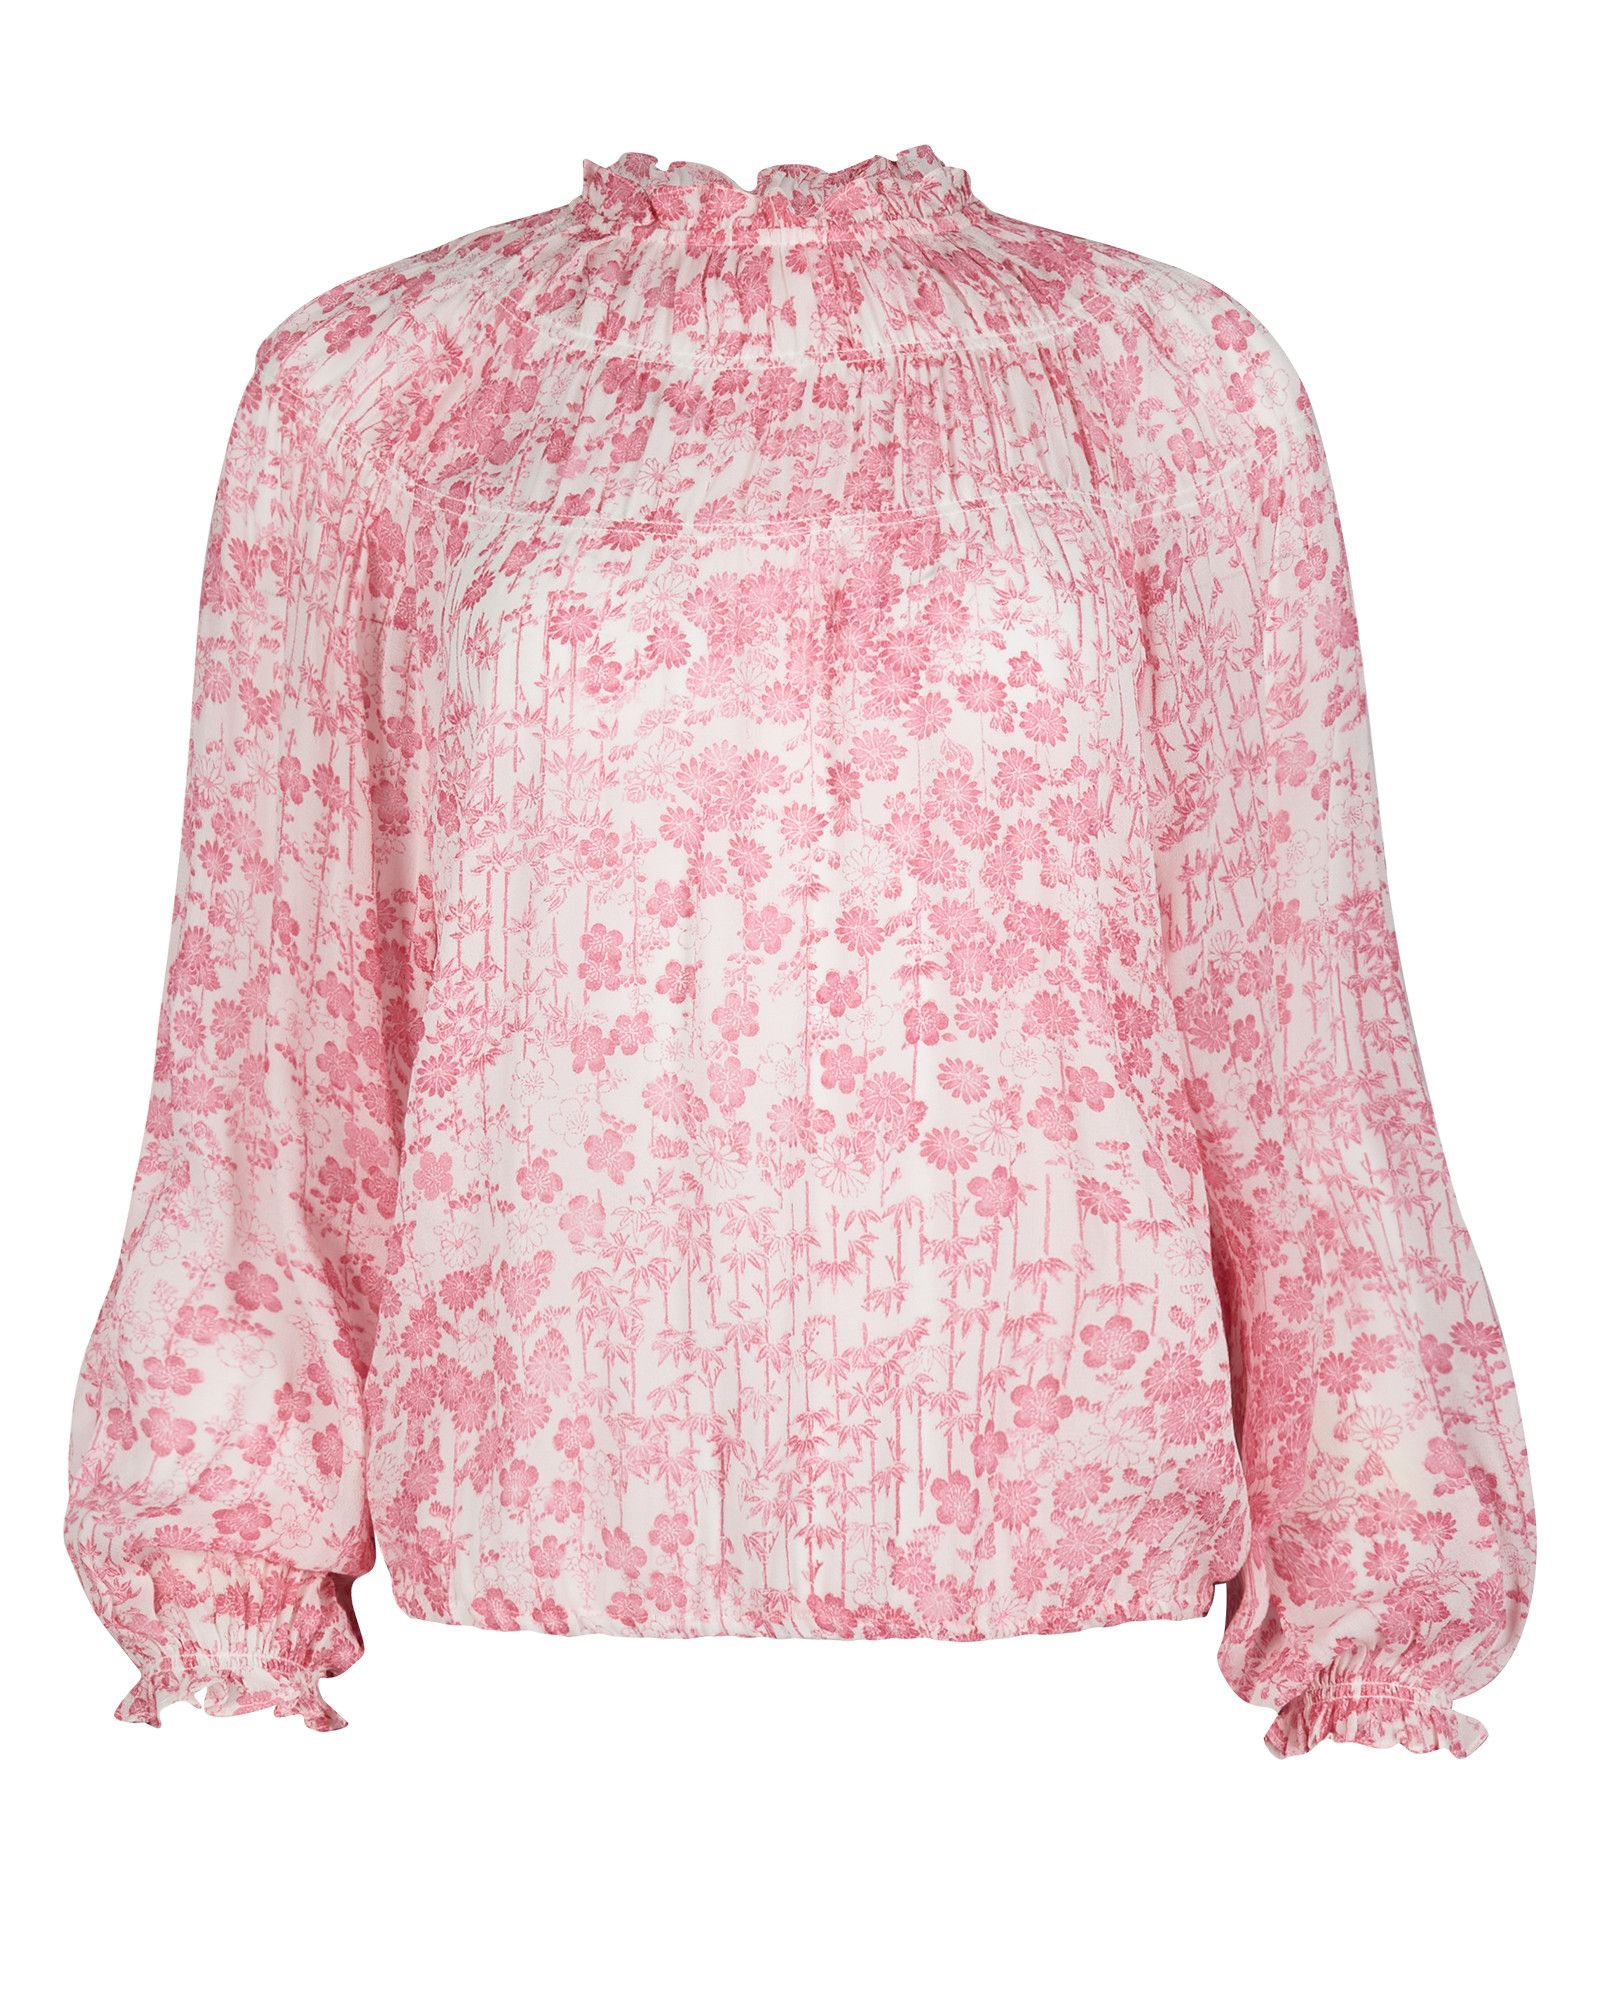 Bamboo Floral Print Pink & White Blouse | Oliver Bonas